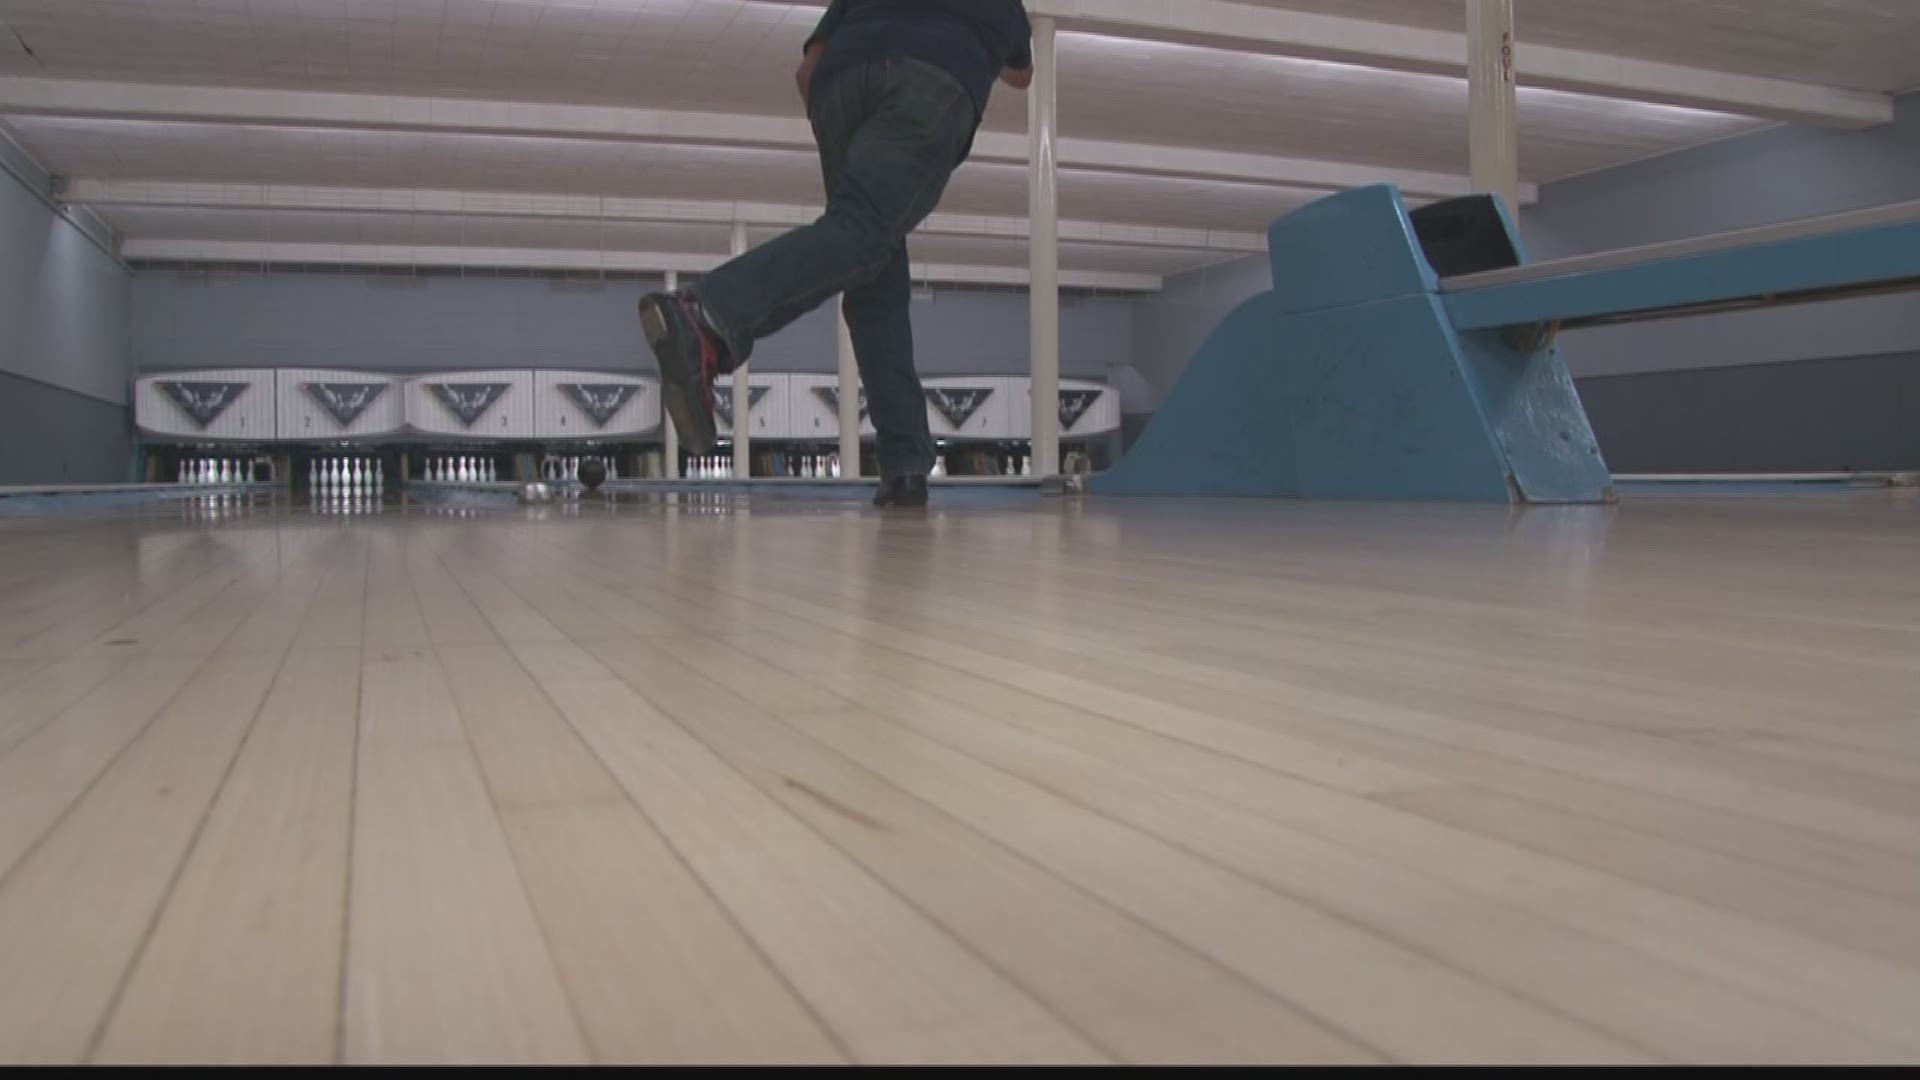 Stephanie Barnes takes us to K&L Lanes in Gowanda for this week's Unique Eats.